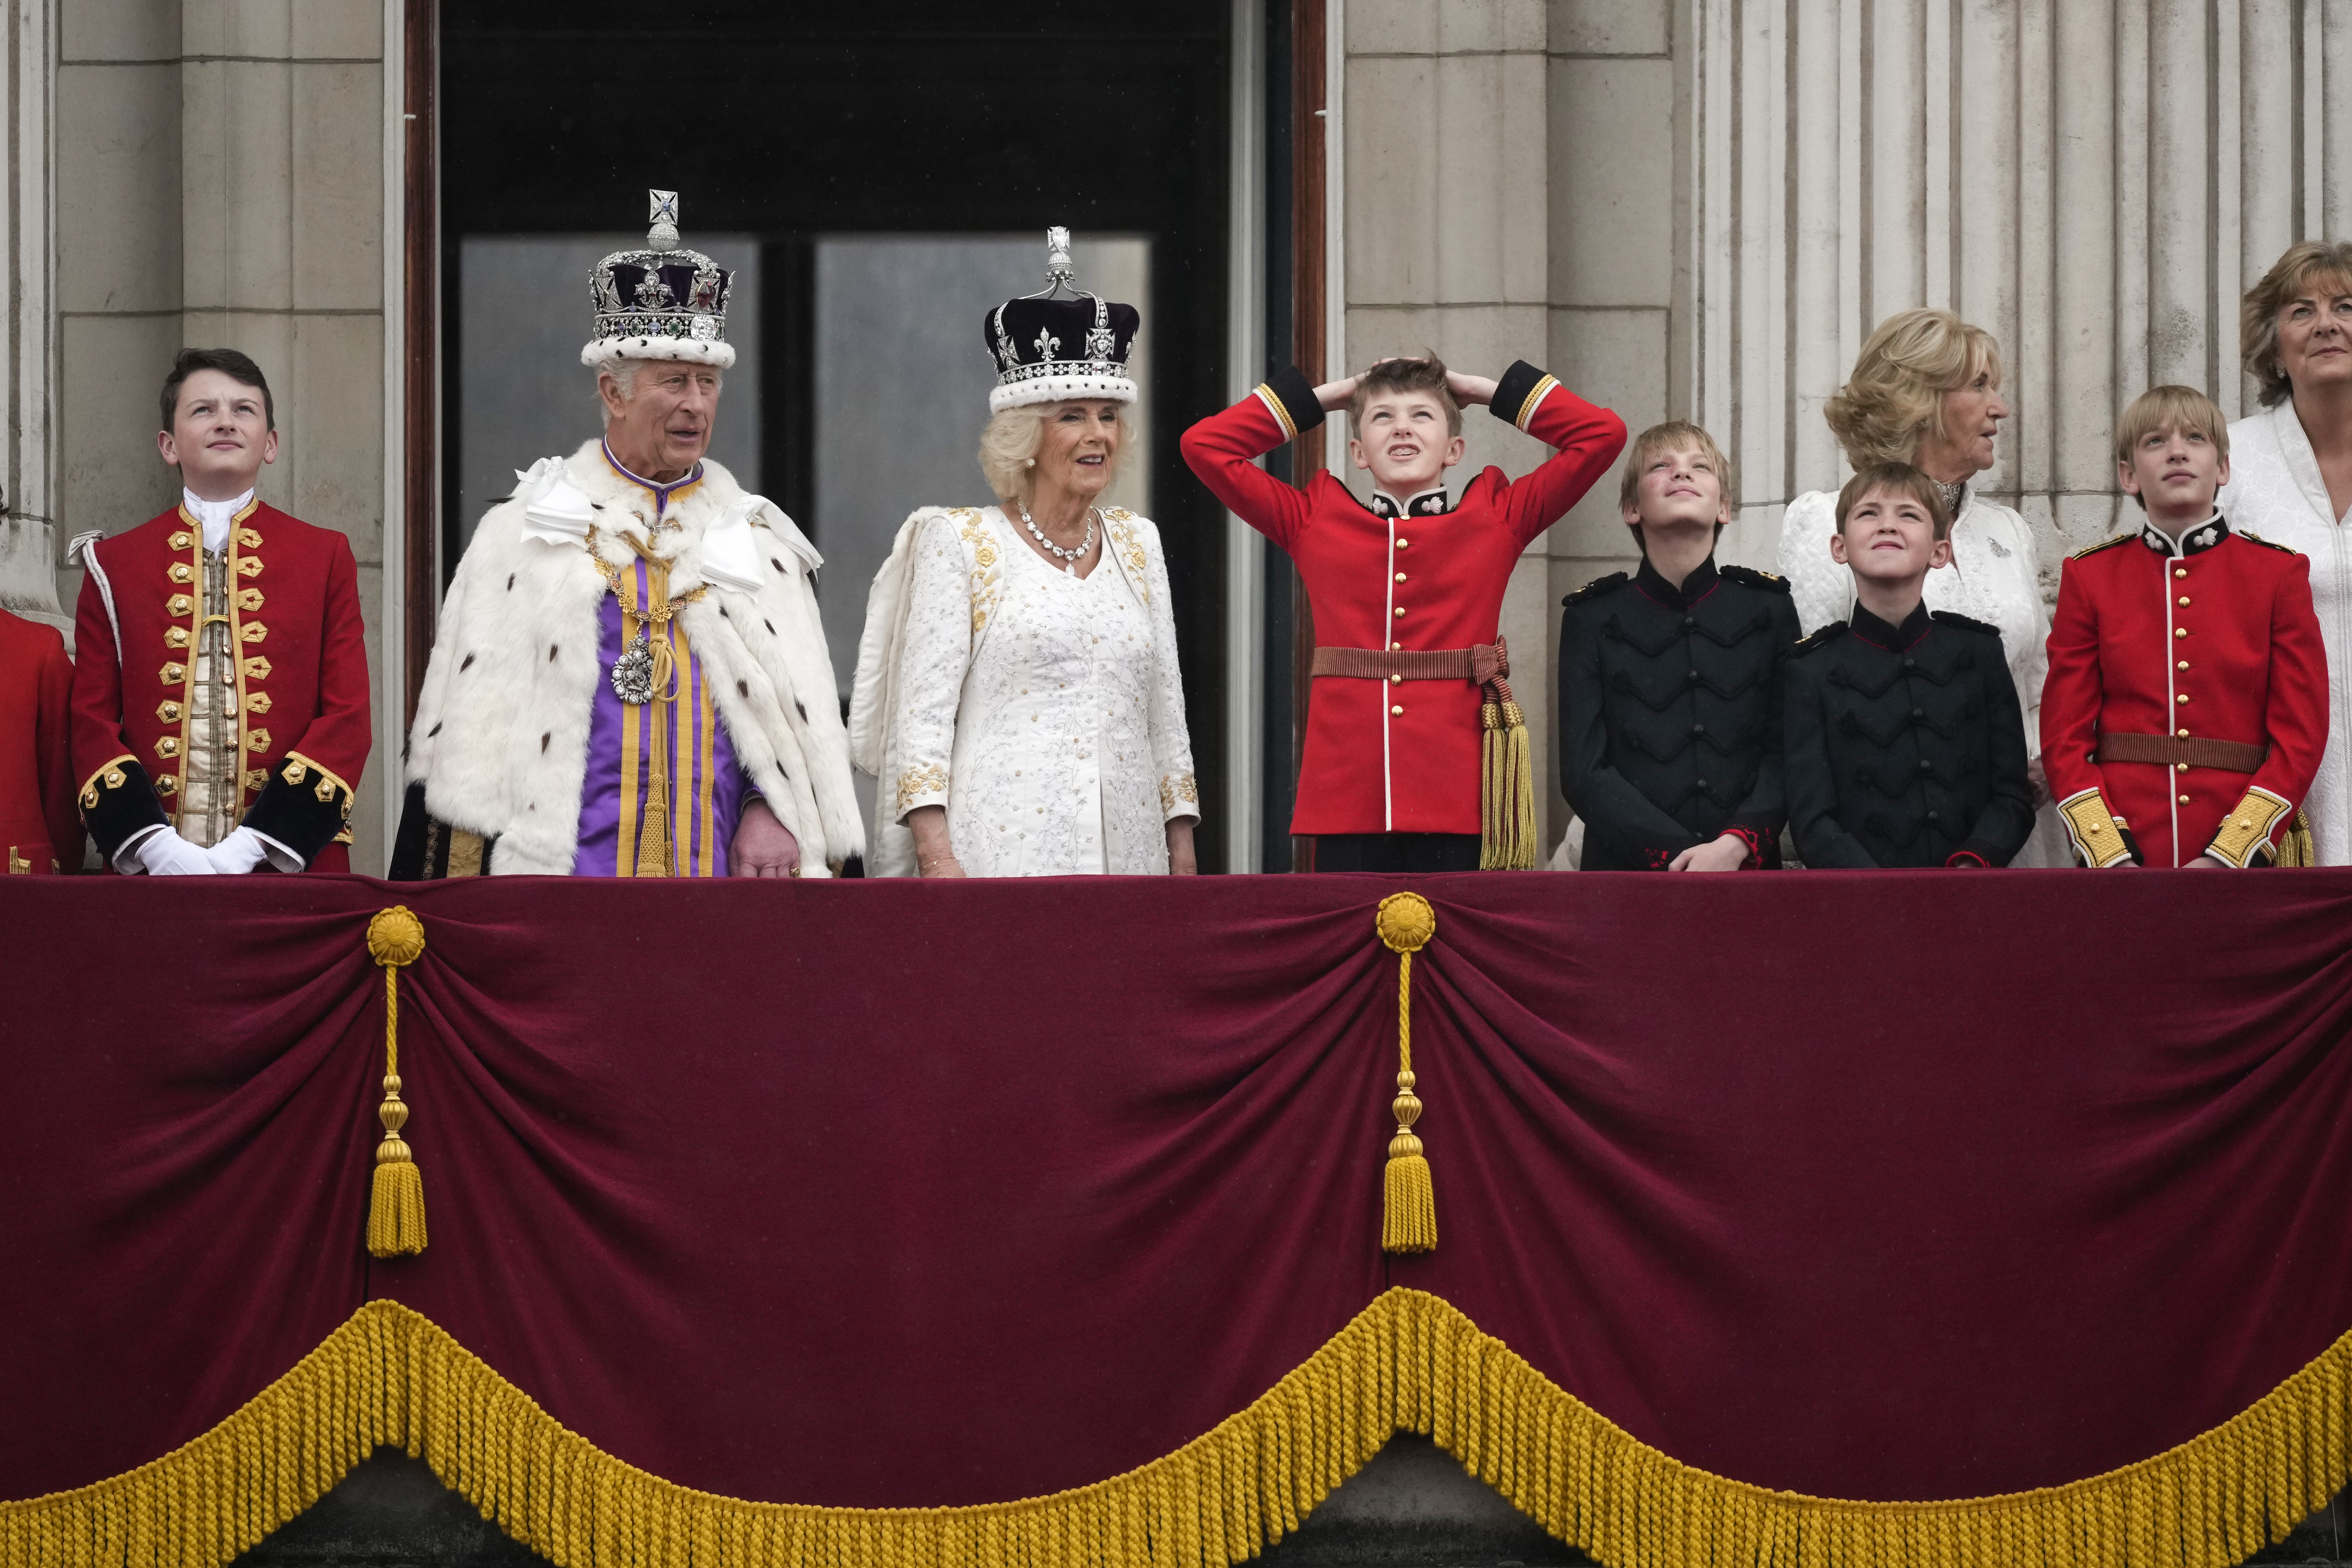 King Charles III, Queen Camilla, Freddy Parker Bowles, Louis Lopes, Annabel Elliot, Gus Lopes, and Arthur Elliot at the Buckingham Palace after the Coronation service on May 6, 2023 in London, England. | Source: Getty Images